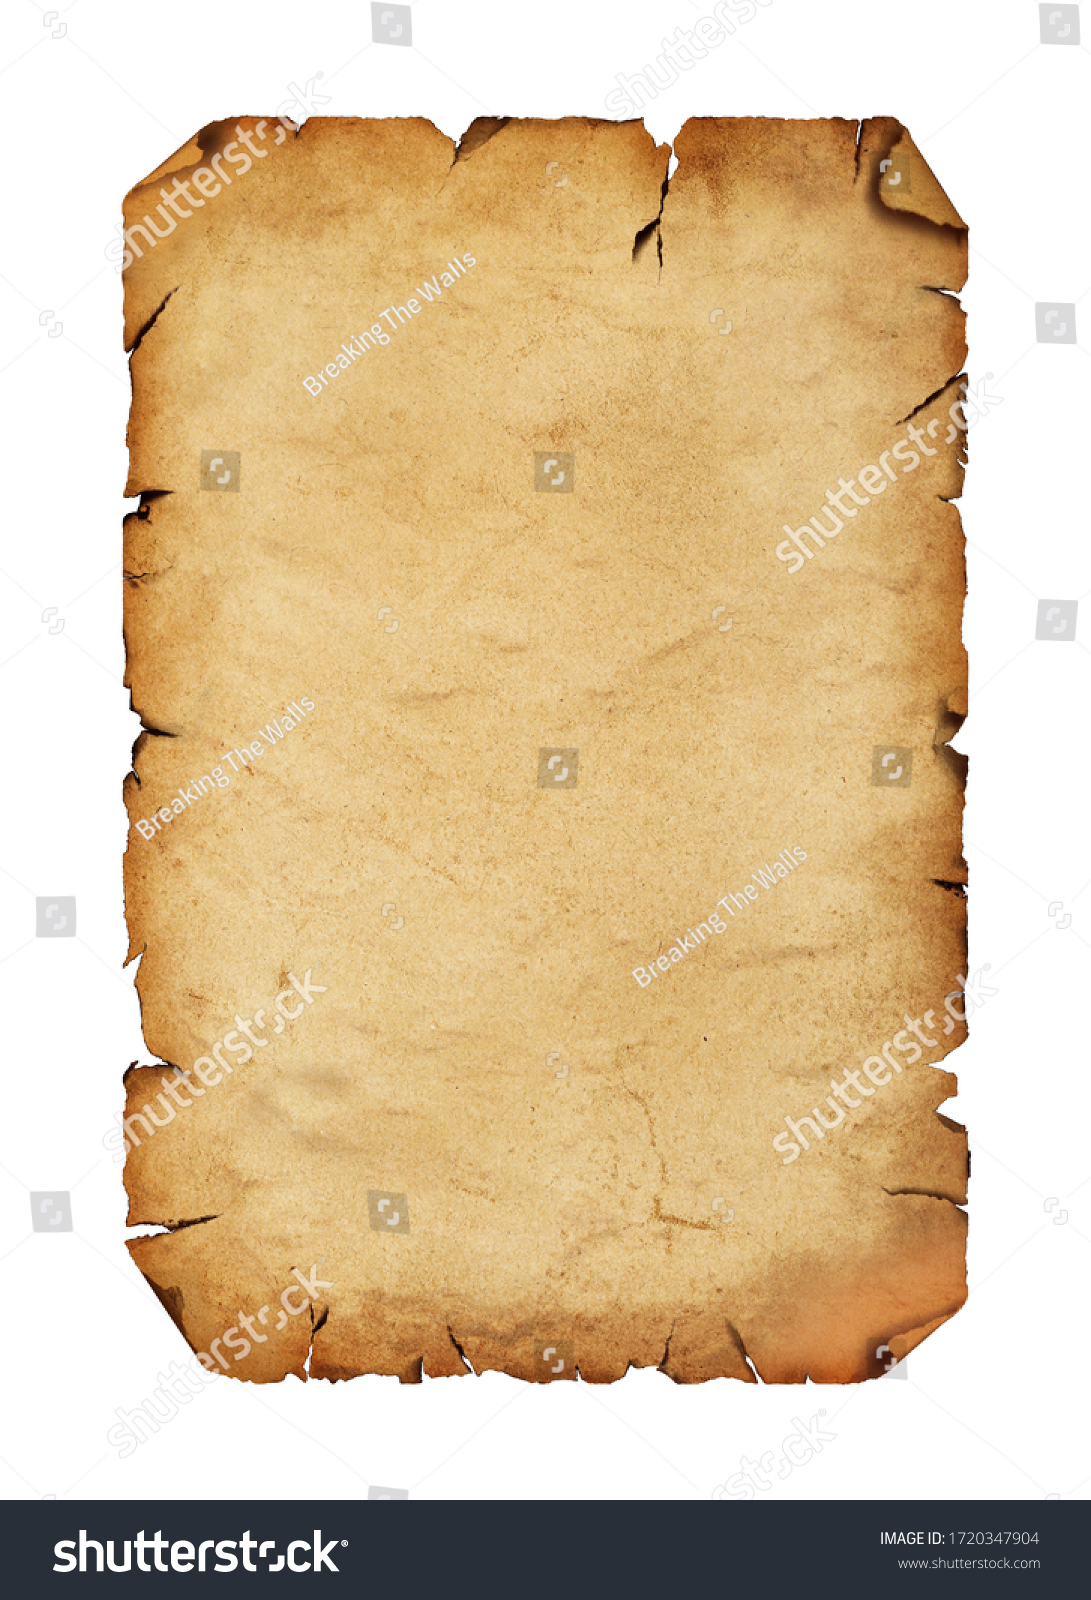 Close up one blank old antique vintage brown paper parchment scroll with copy space isolated on white background #1720347904